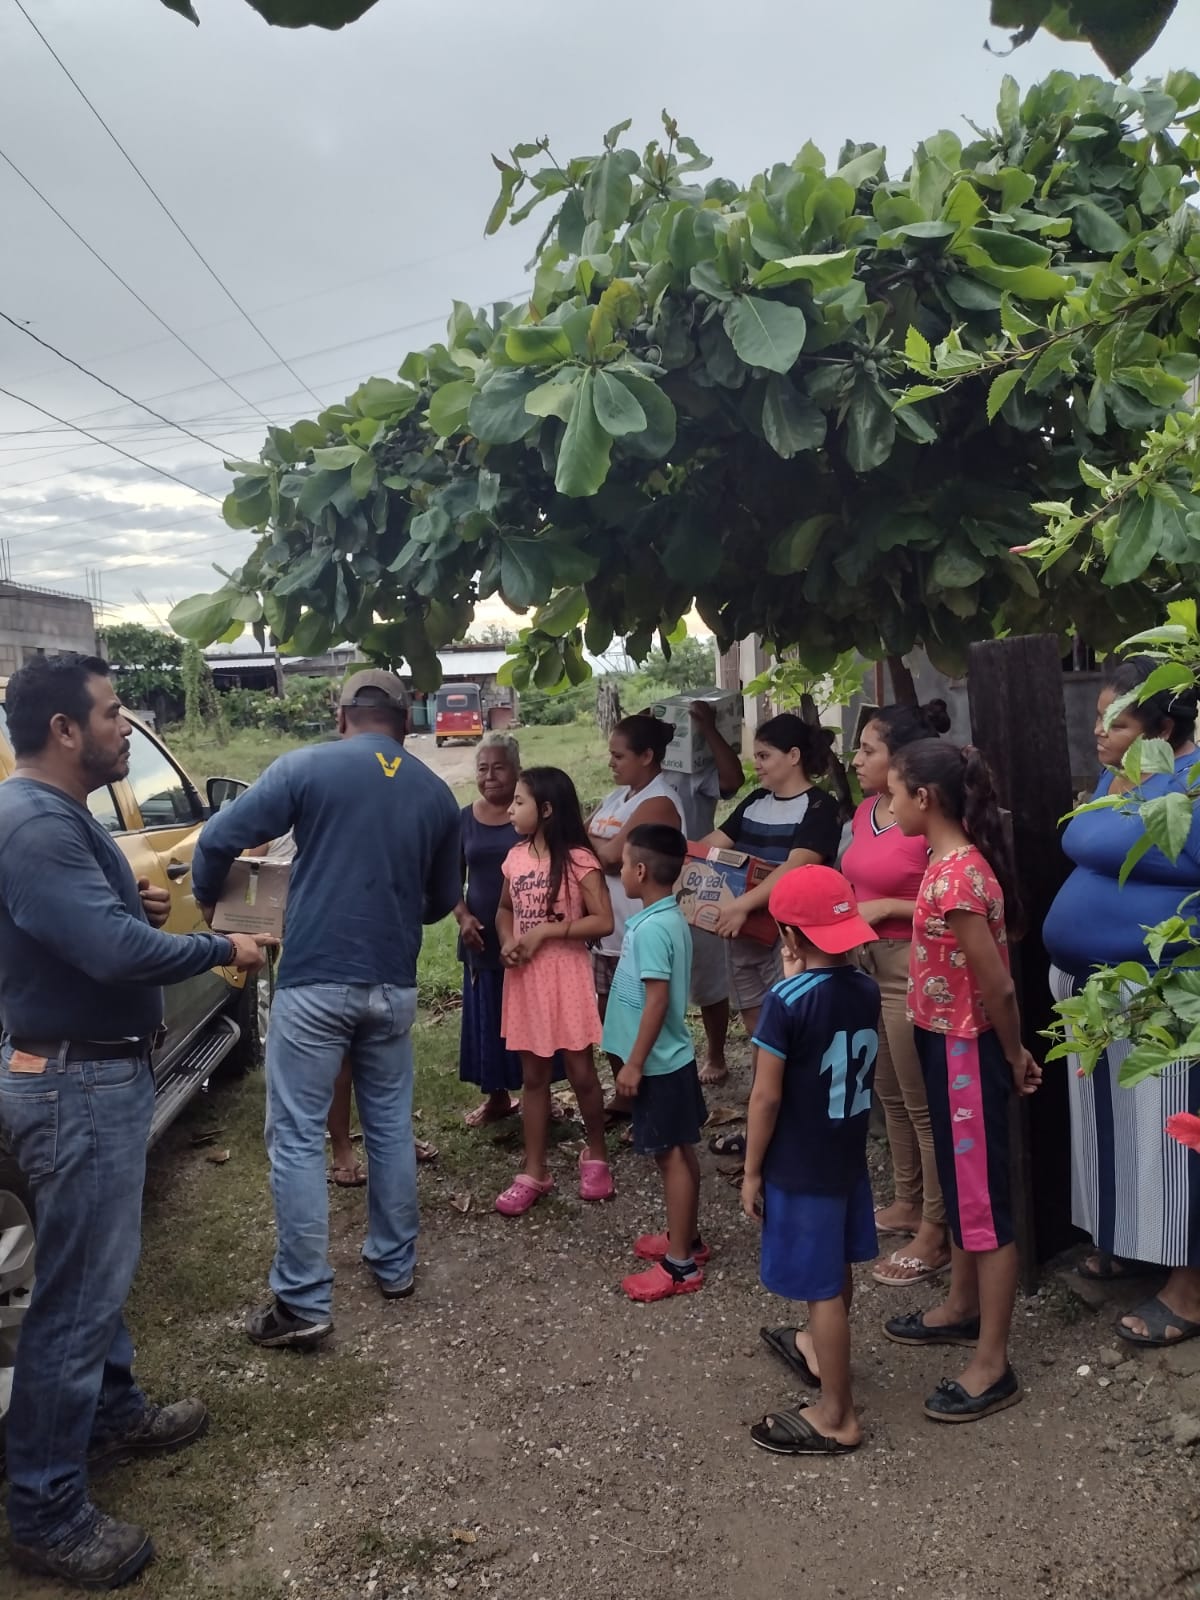 Participation in the flood recovery activities in the Istmo of Oaxaca